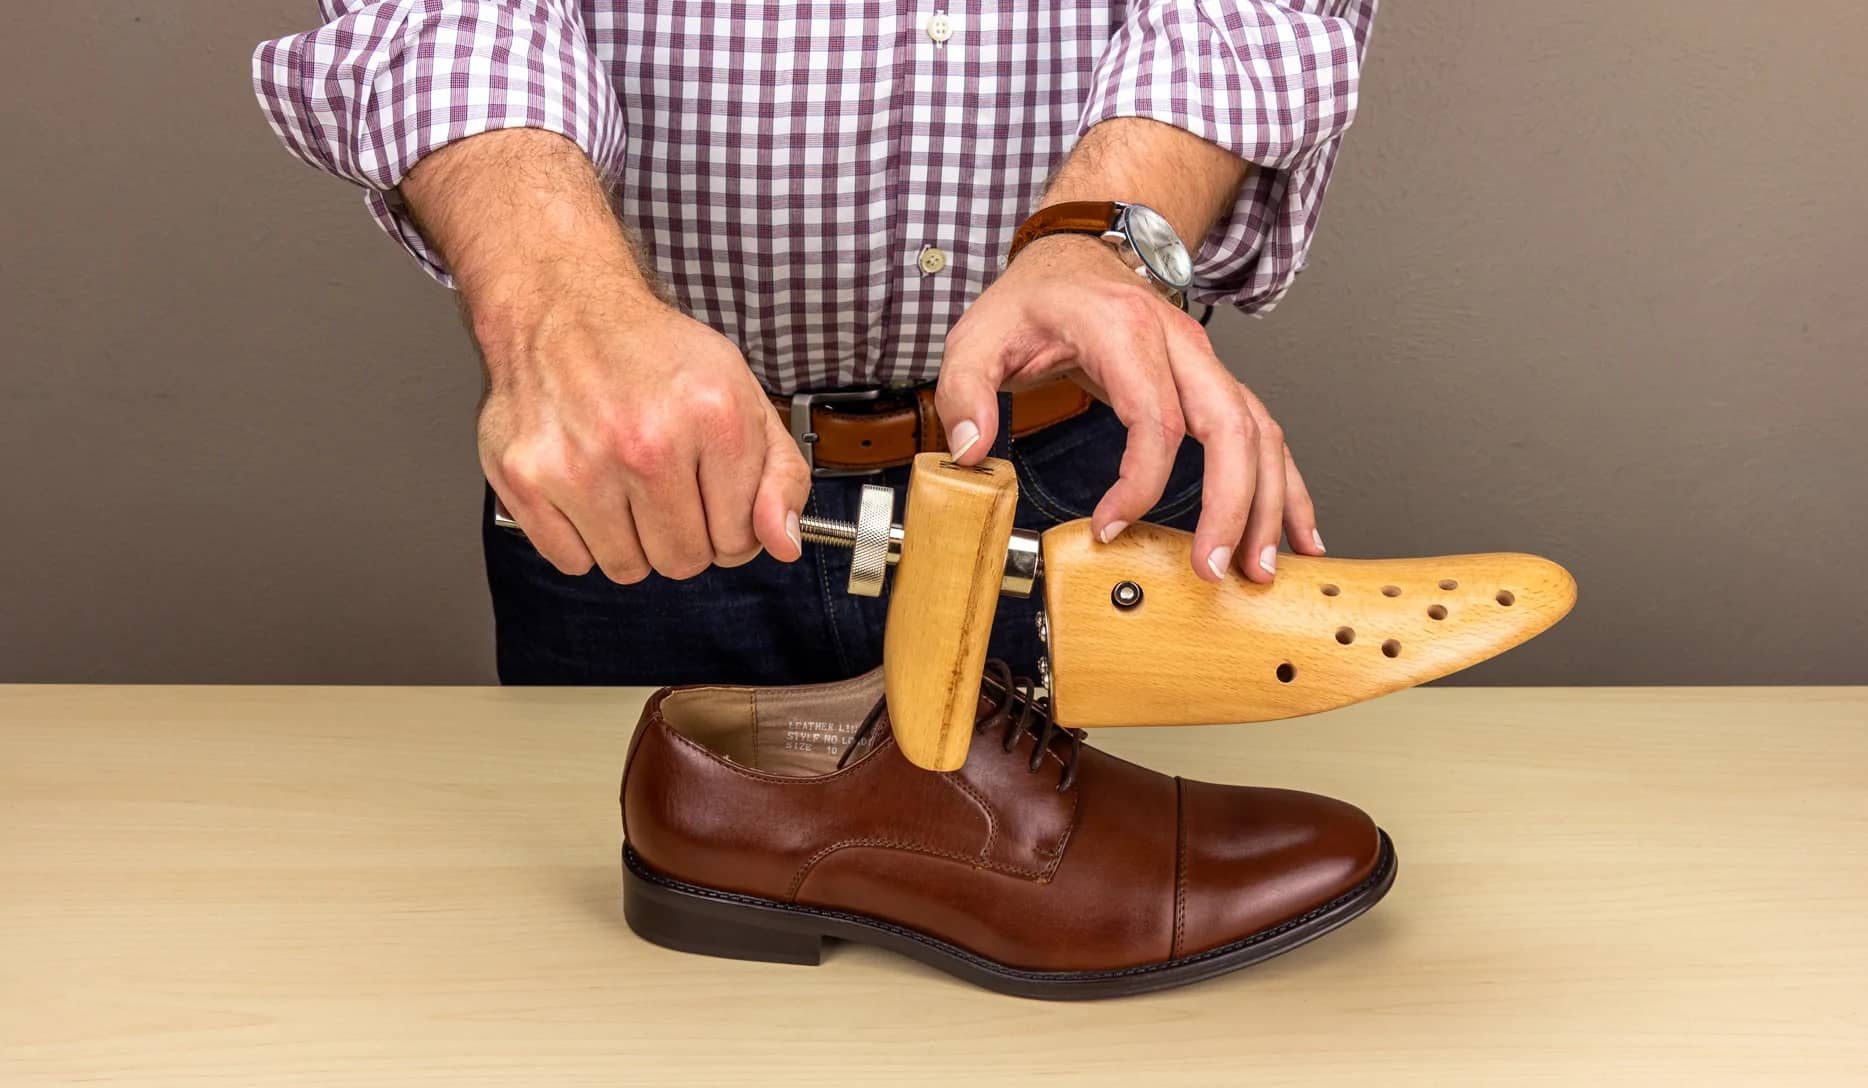 how to stretch leather shoes wider for more comfort - Arad Branding